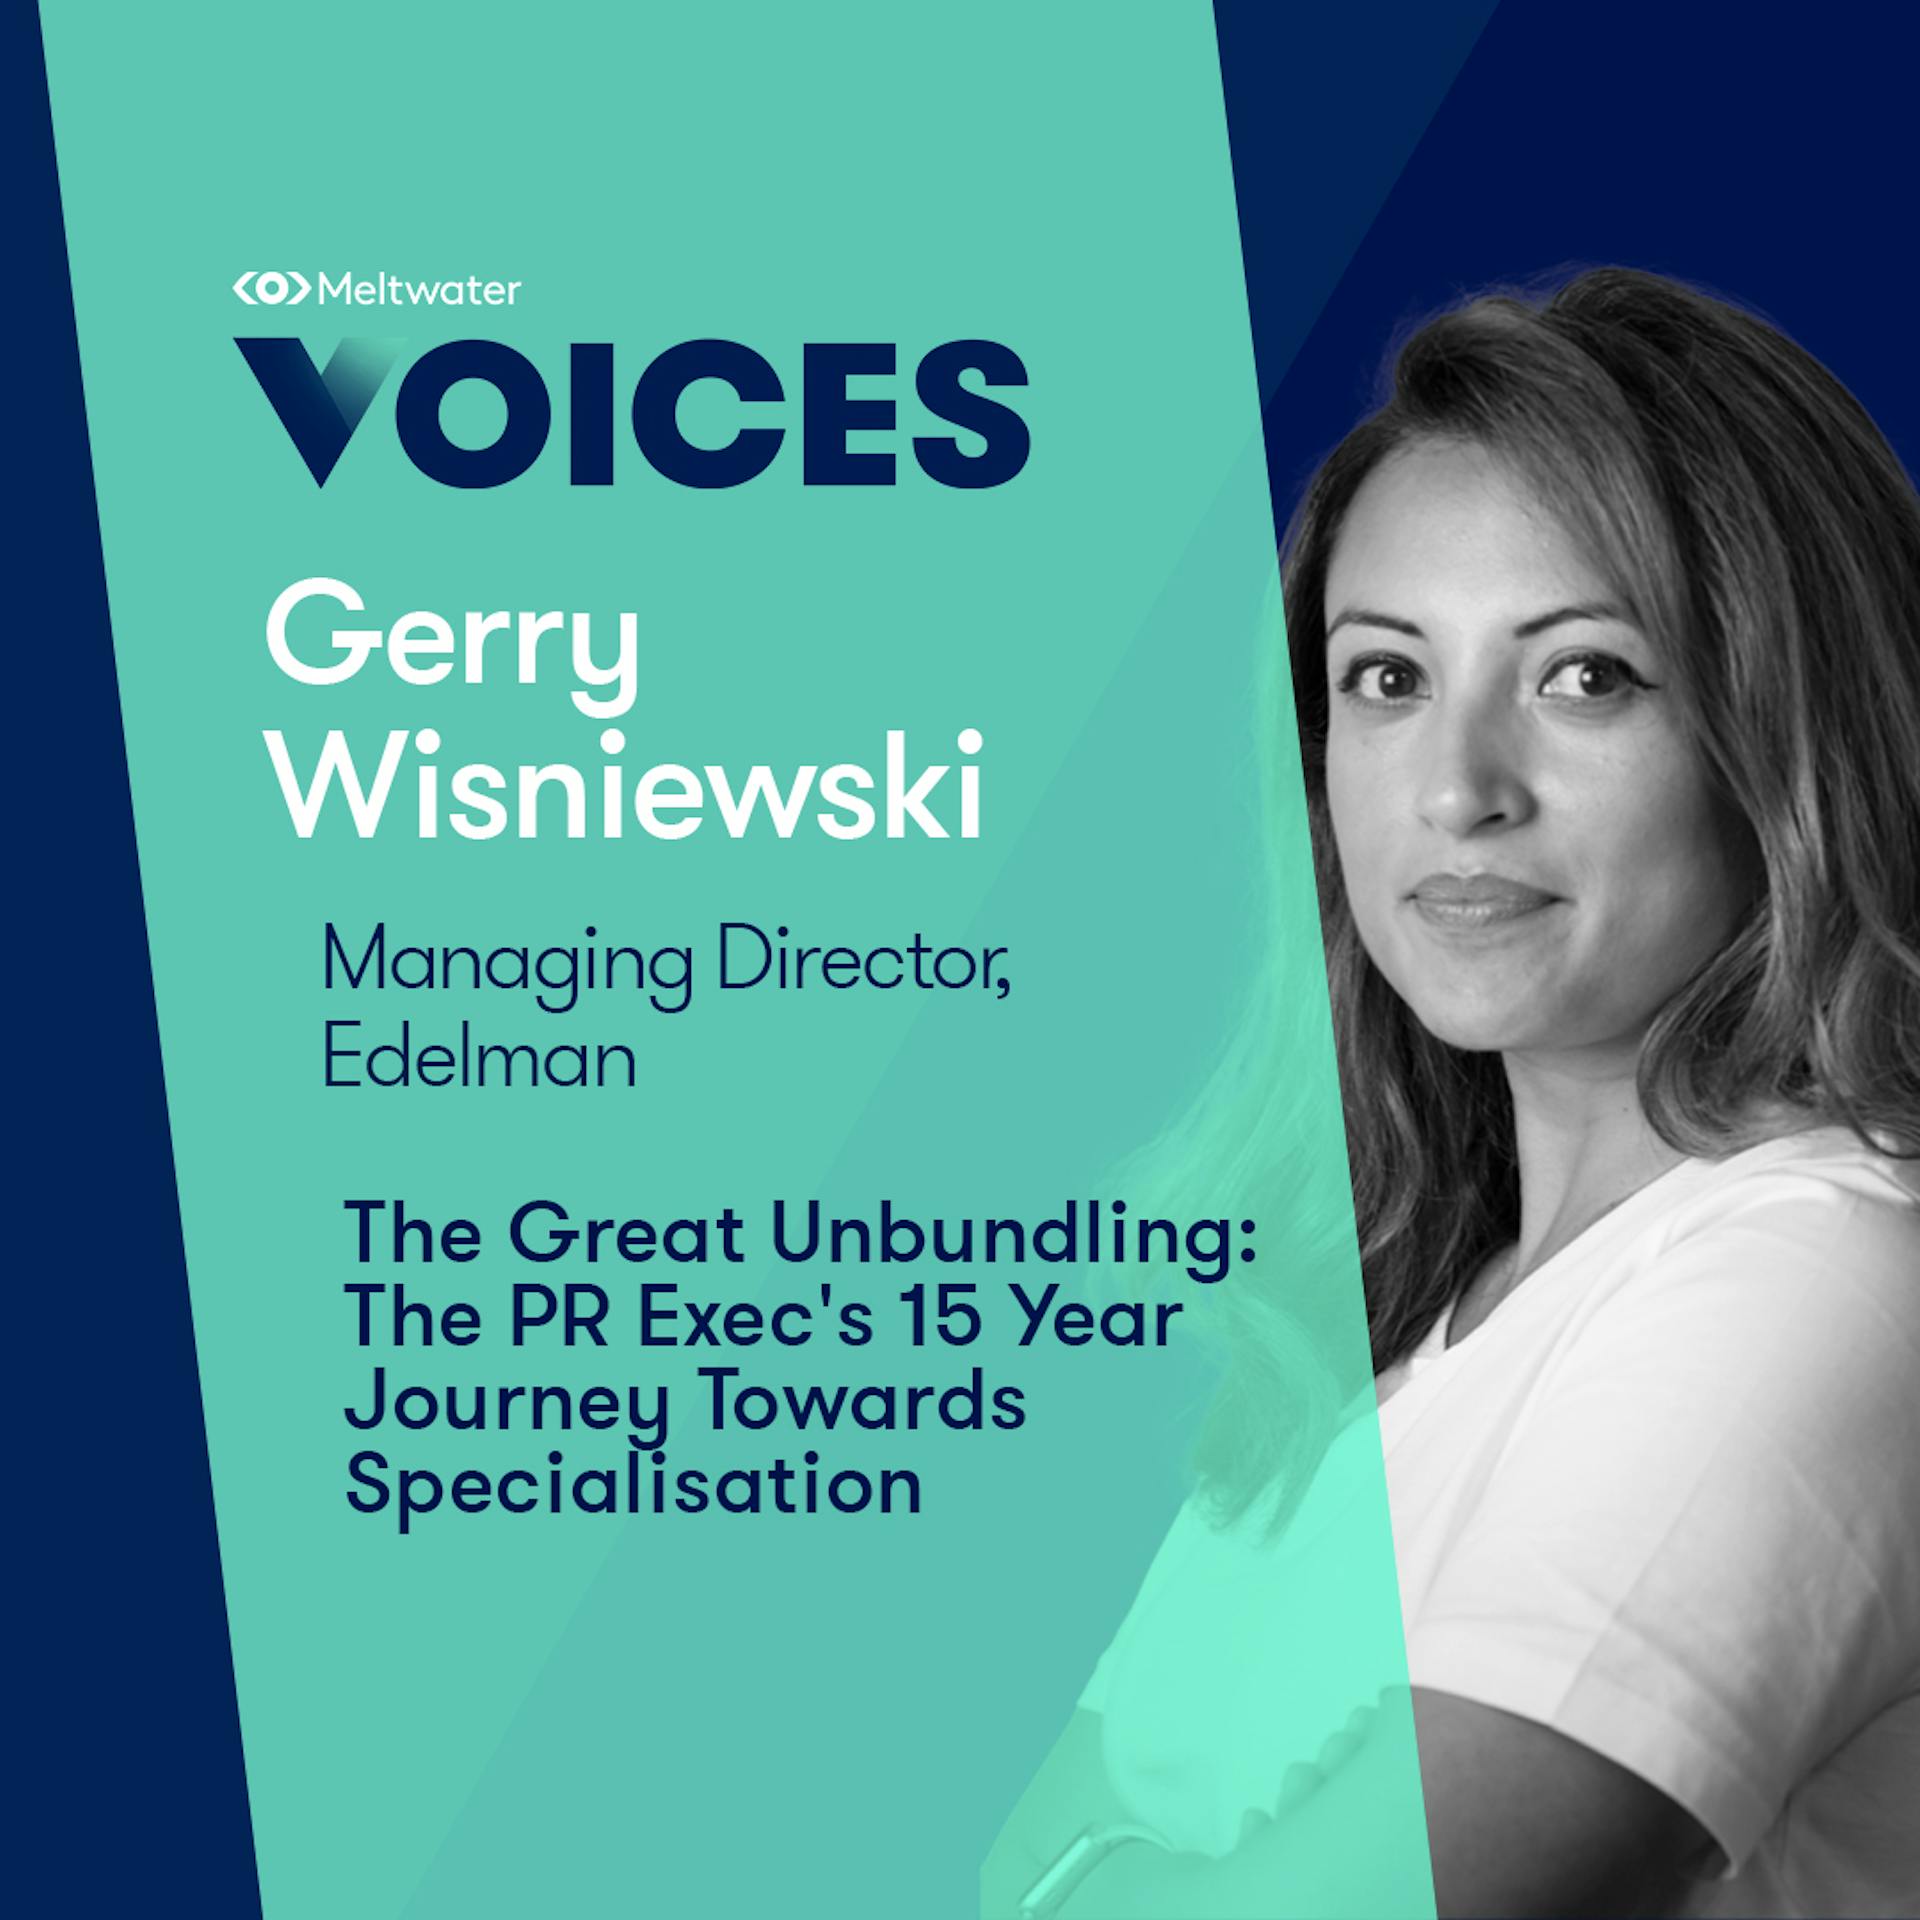 Meltwater Voices - Digital Transformation in Communications and Marketing - Gerry Wisniewski